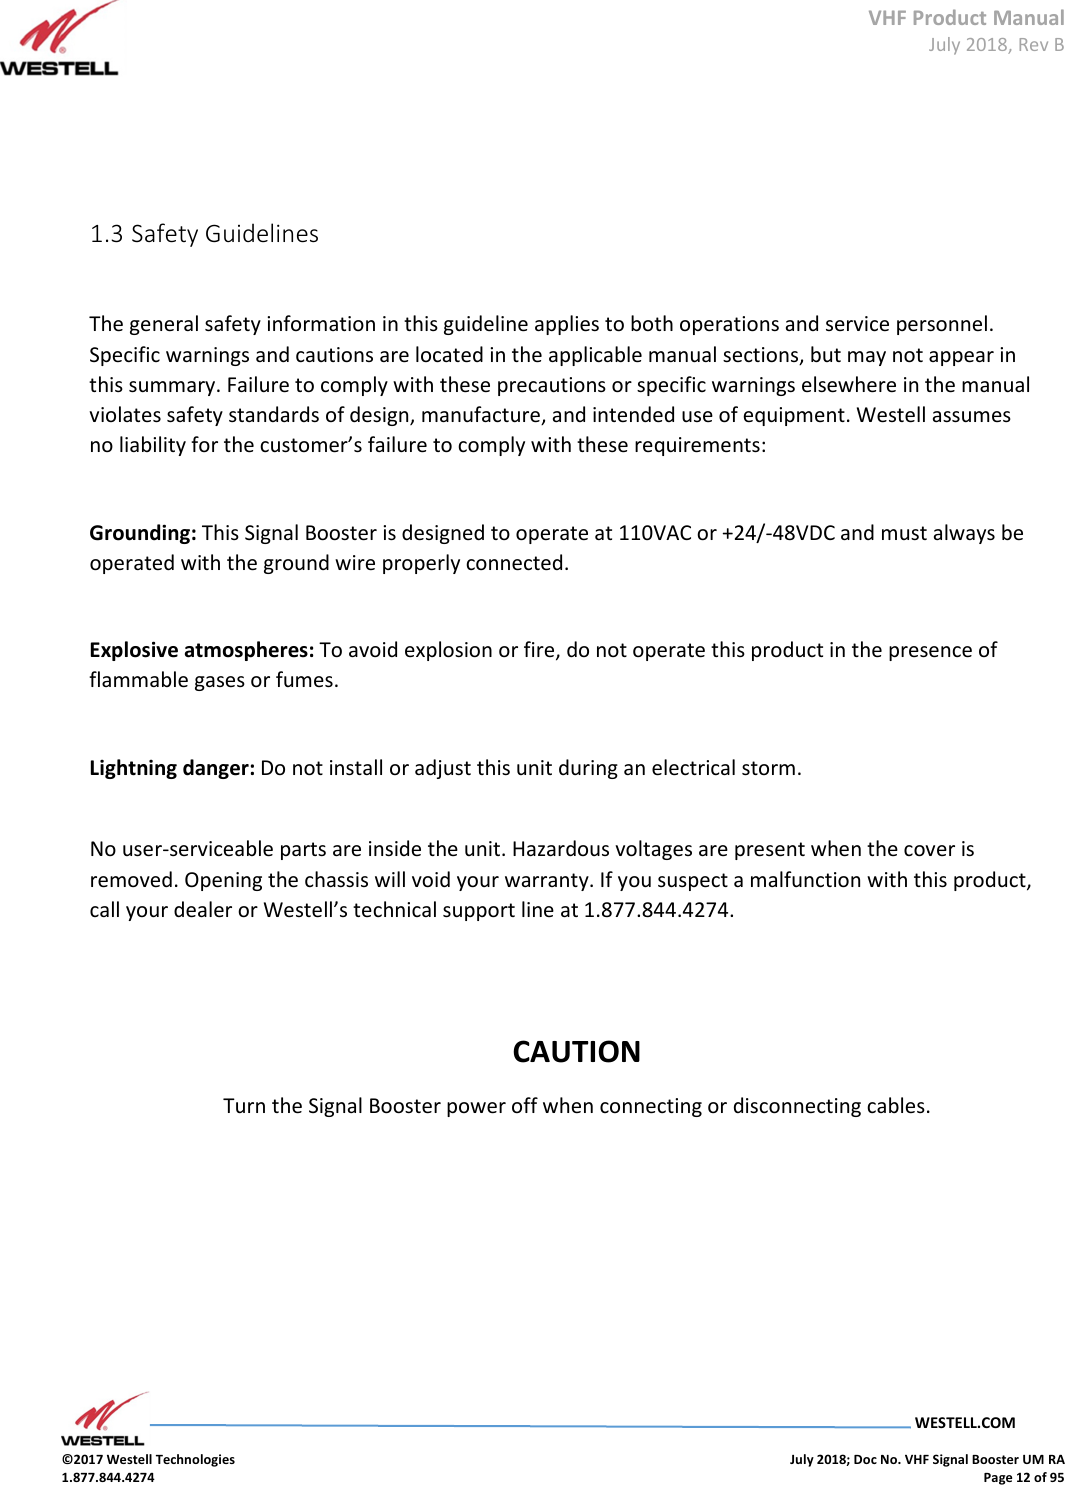 VHF Product Manual July 2018, Rev B   WESTELL.COM  ©2017 Westell Technologies    July 2018; Doc No. VHF Signal Booster UM RA 1.877.844.4274    Page 12 of 95         1.3 Safety Guidelines    The general safety information in this guideline applies to both operations and service personnel. Specific warnings and cautions are located in the applicable manual sections, but may not appear in this summary. Failure to comply with these precautions or specific warnings elsewhere in the manual violates safety standards of design, manufacture, and intended use of equipment. Westell assumes no liability for the customer’s failure to comply with these requirements:    Grounding: This Signal Booster is designed to operate at 110VAC or +24/-48VDC and must always be operated with the ground wire properly connected.     Explosive atmospheres: To avoid explosion or fire, do not operate this product in the presence of flammable gases or fumes.    Lightning danger: Do not install or adjust this unit during an electrical storm.     No user-serviceable parts are inside the unit. Hazardous voltages are present when the cover is removed. Opening the chassis will void your warranty. If you suspect a malfunction with this product, call your dealer or Westell’s technical support line at 1.877.844.4274.       CAUTION Turn the Signal Booster power off when connecting or disconnecting cables.               